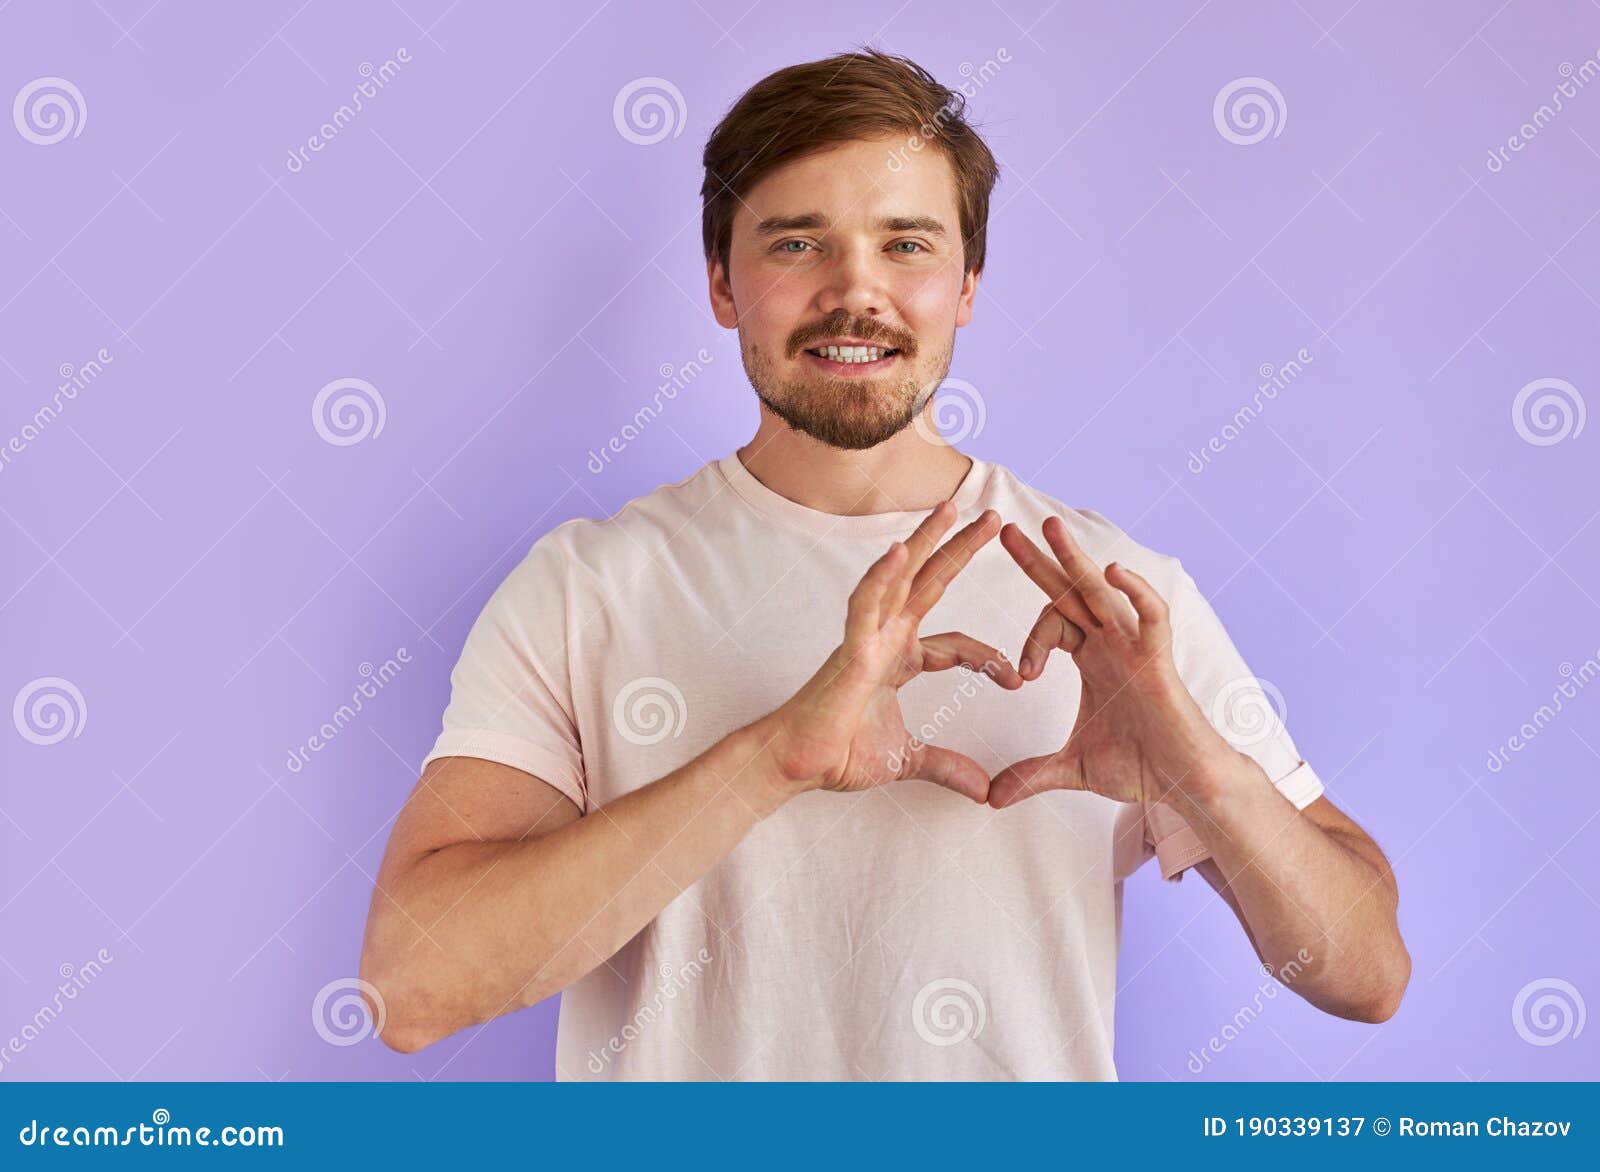 positive guy shows love gesture at camera